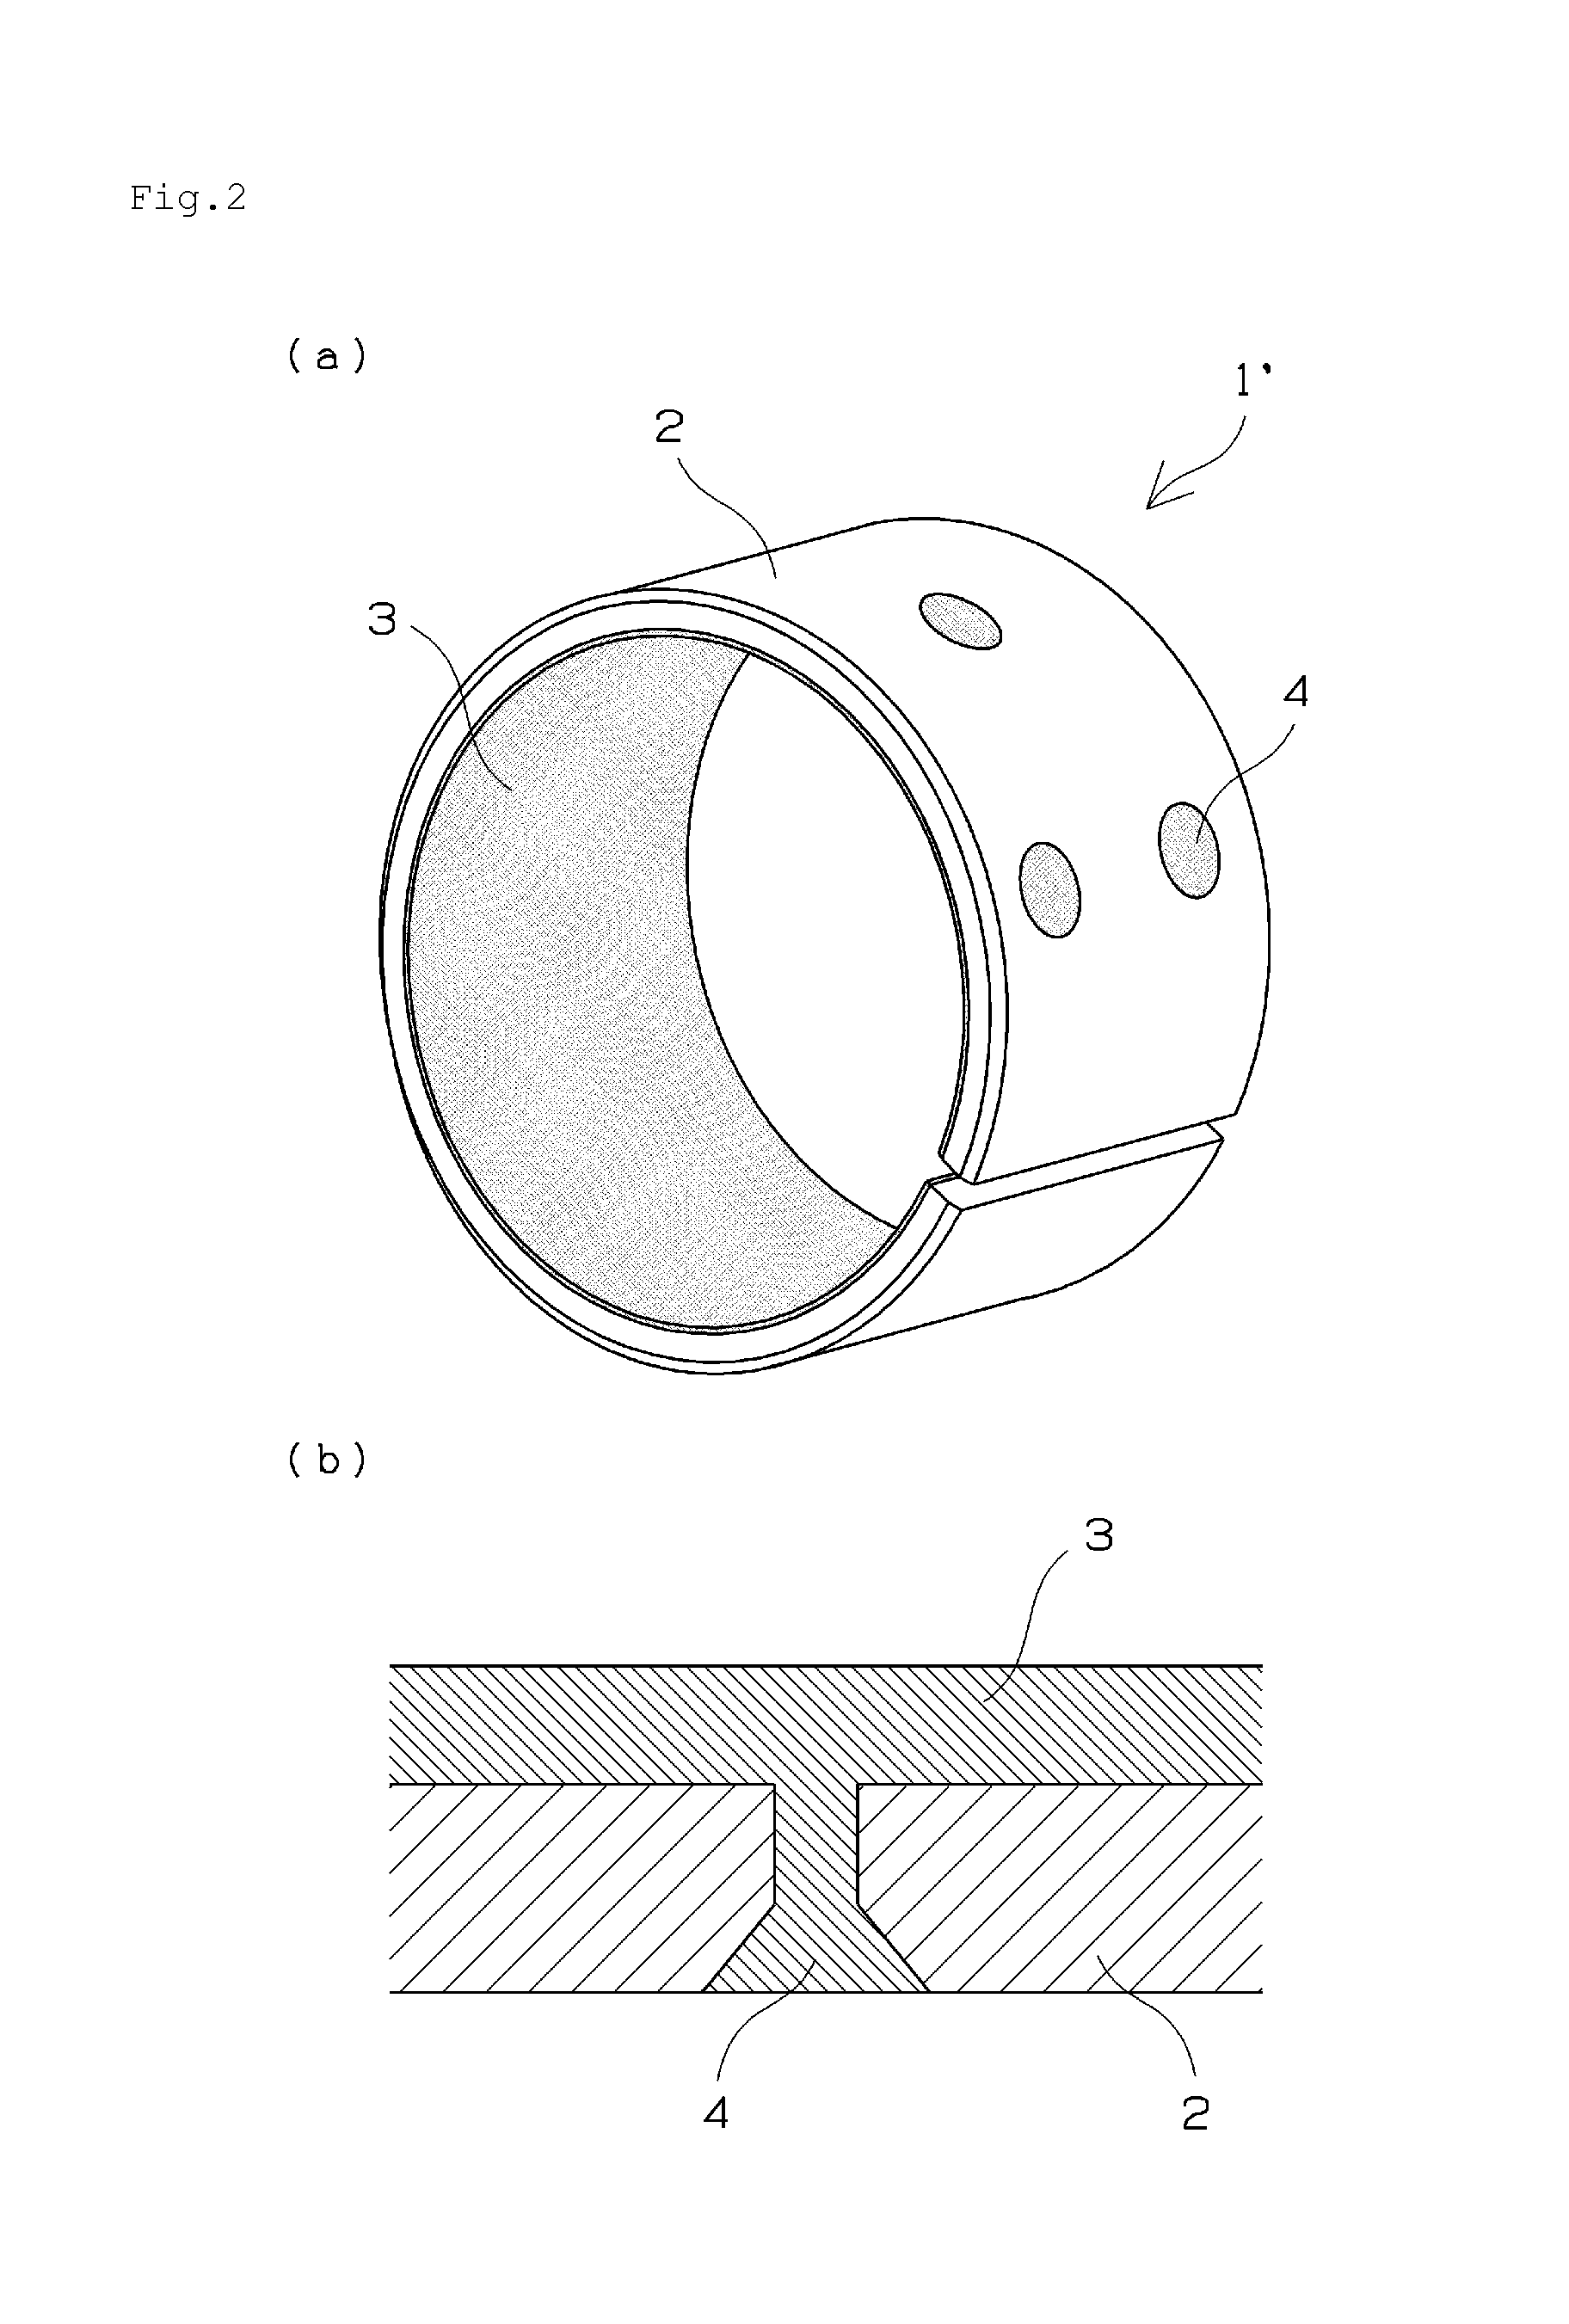 Composite plain bearing, cradle guide, and sliding nut